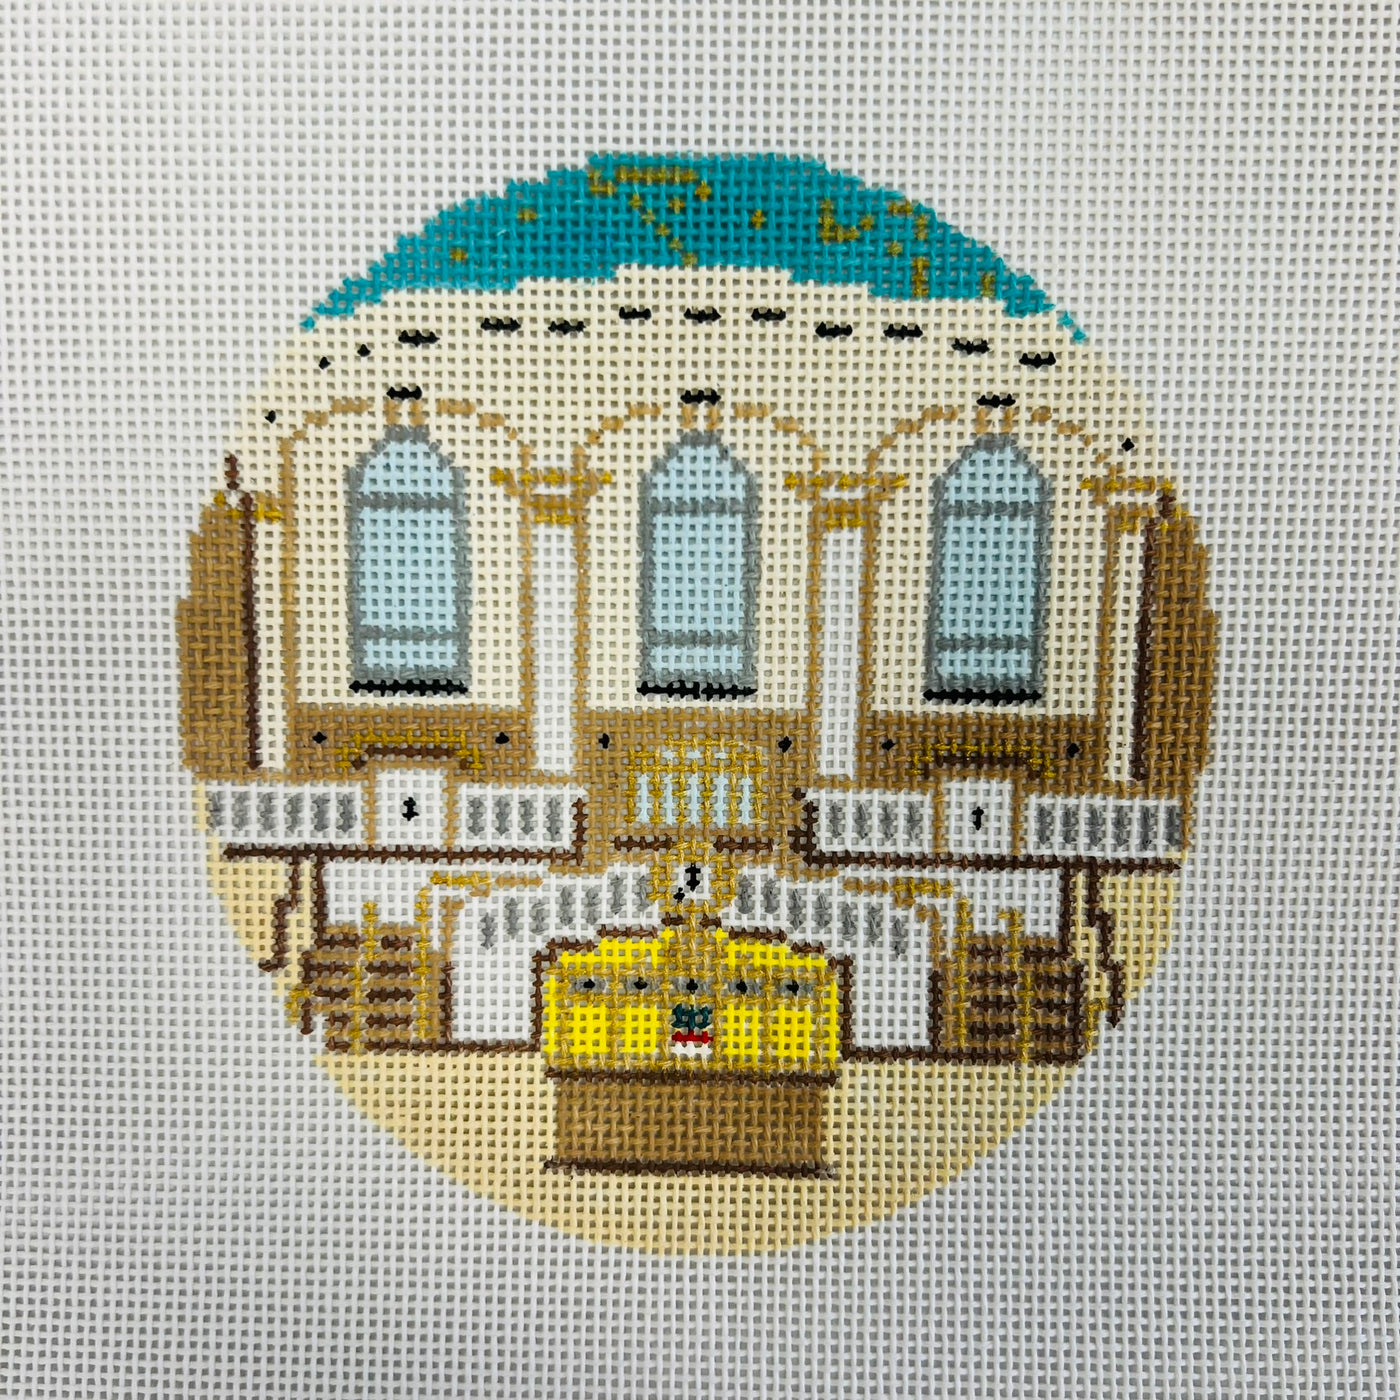 Grand Central Terminal Ornament with Stitch Guide Needlepoint Canvas